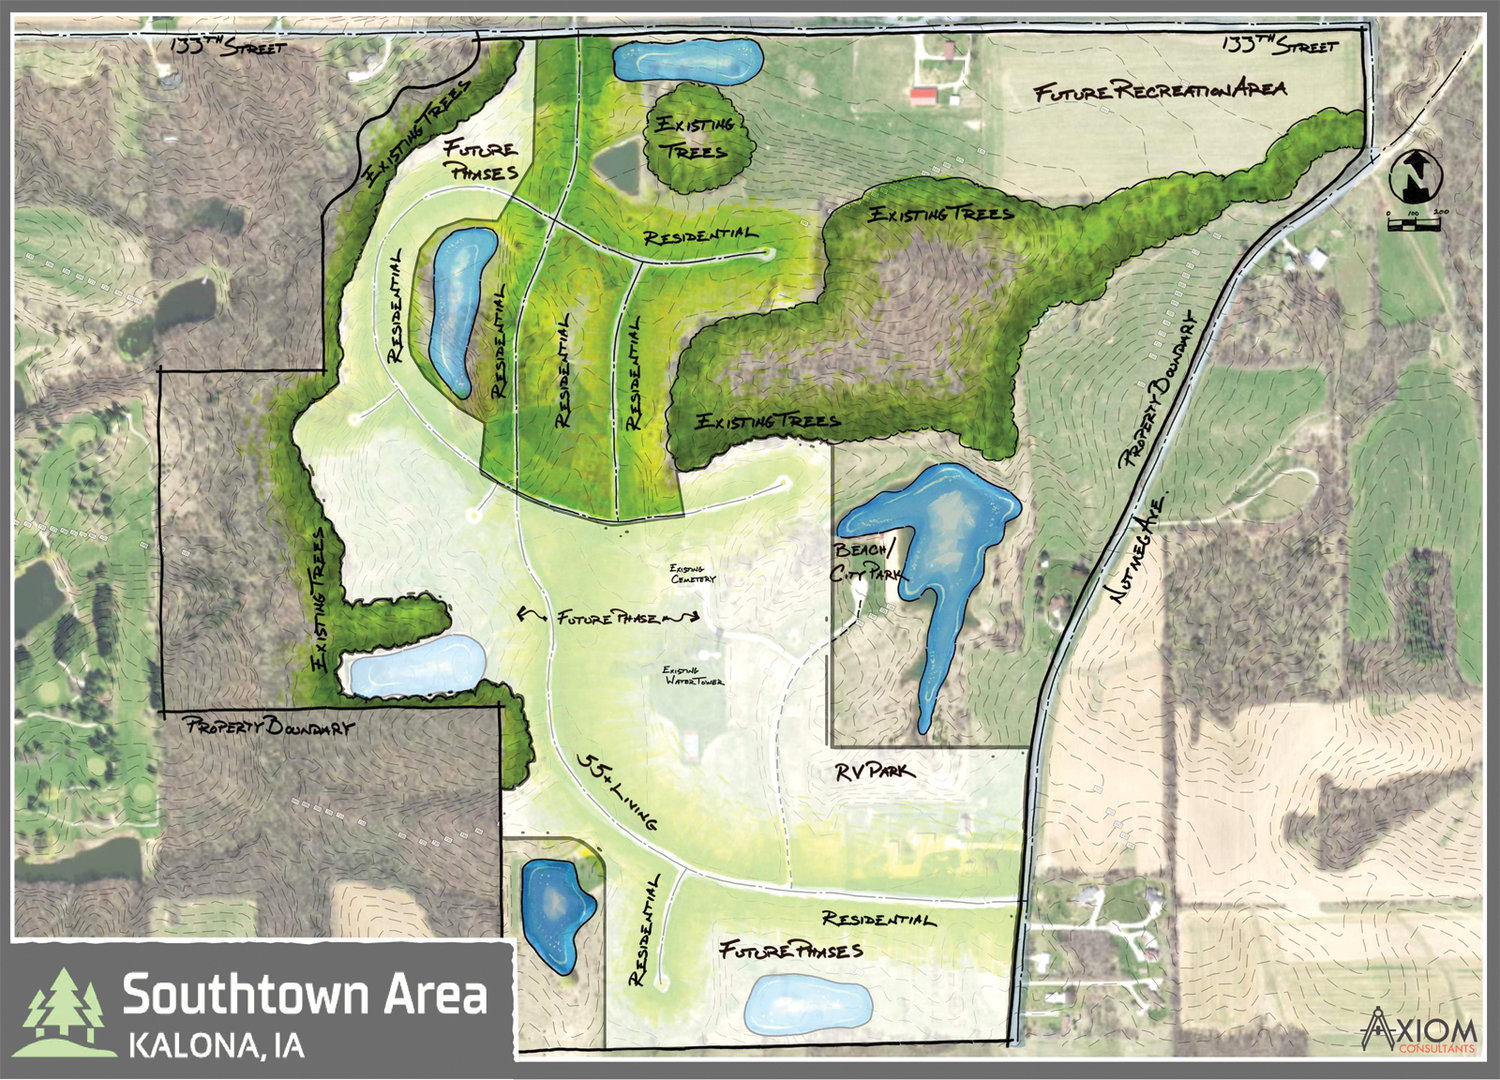 Adam Kos of CJ Moyna and Sons, the developer for the Shiloh property, presented this initial plan for the development of the property to the Kalona City Council Monday night.